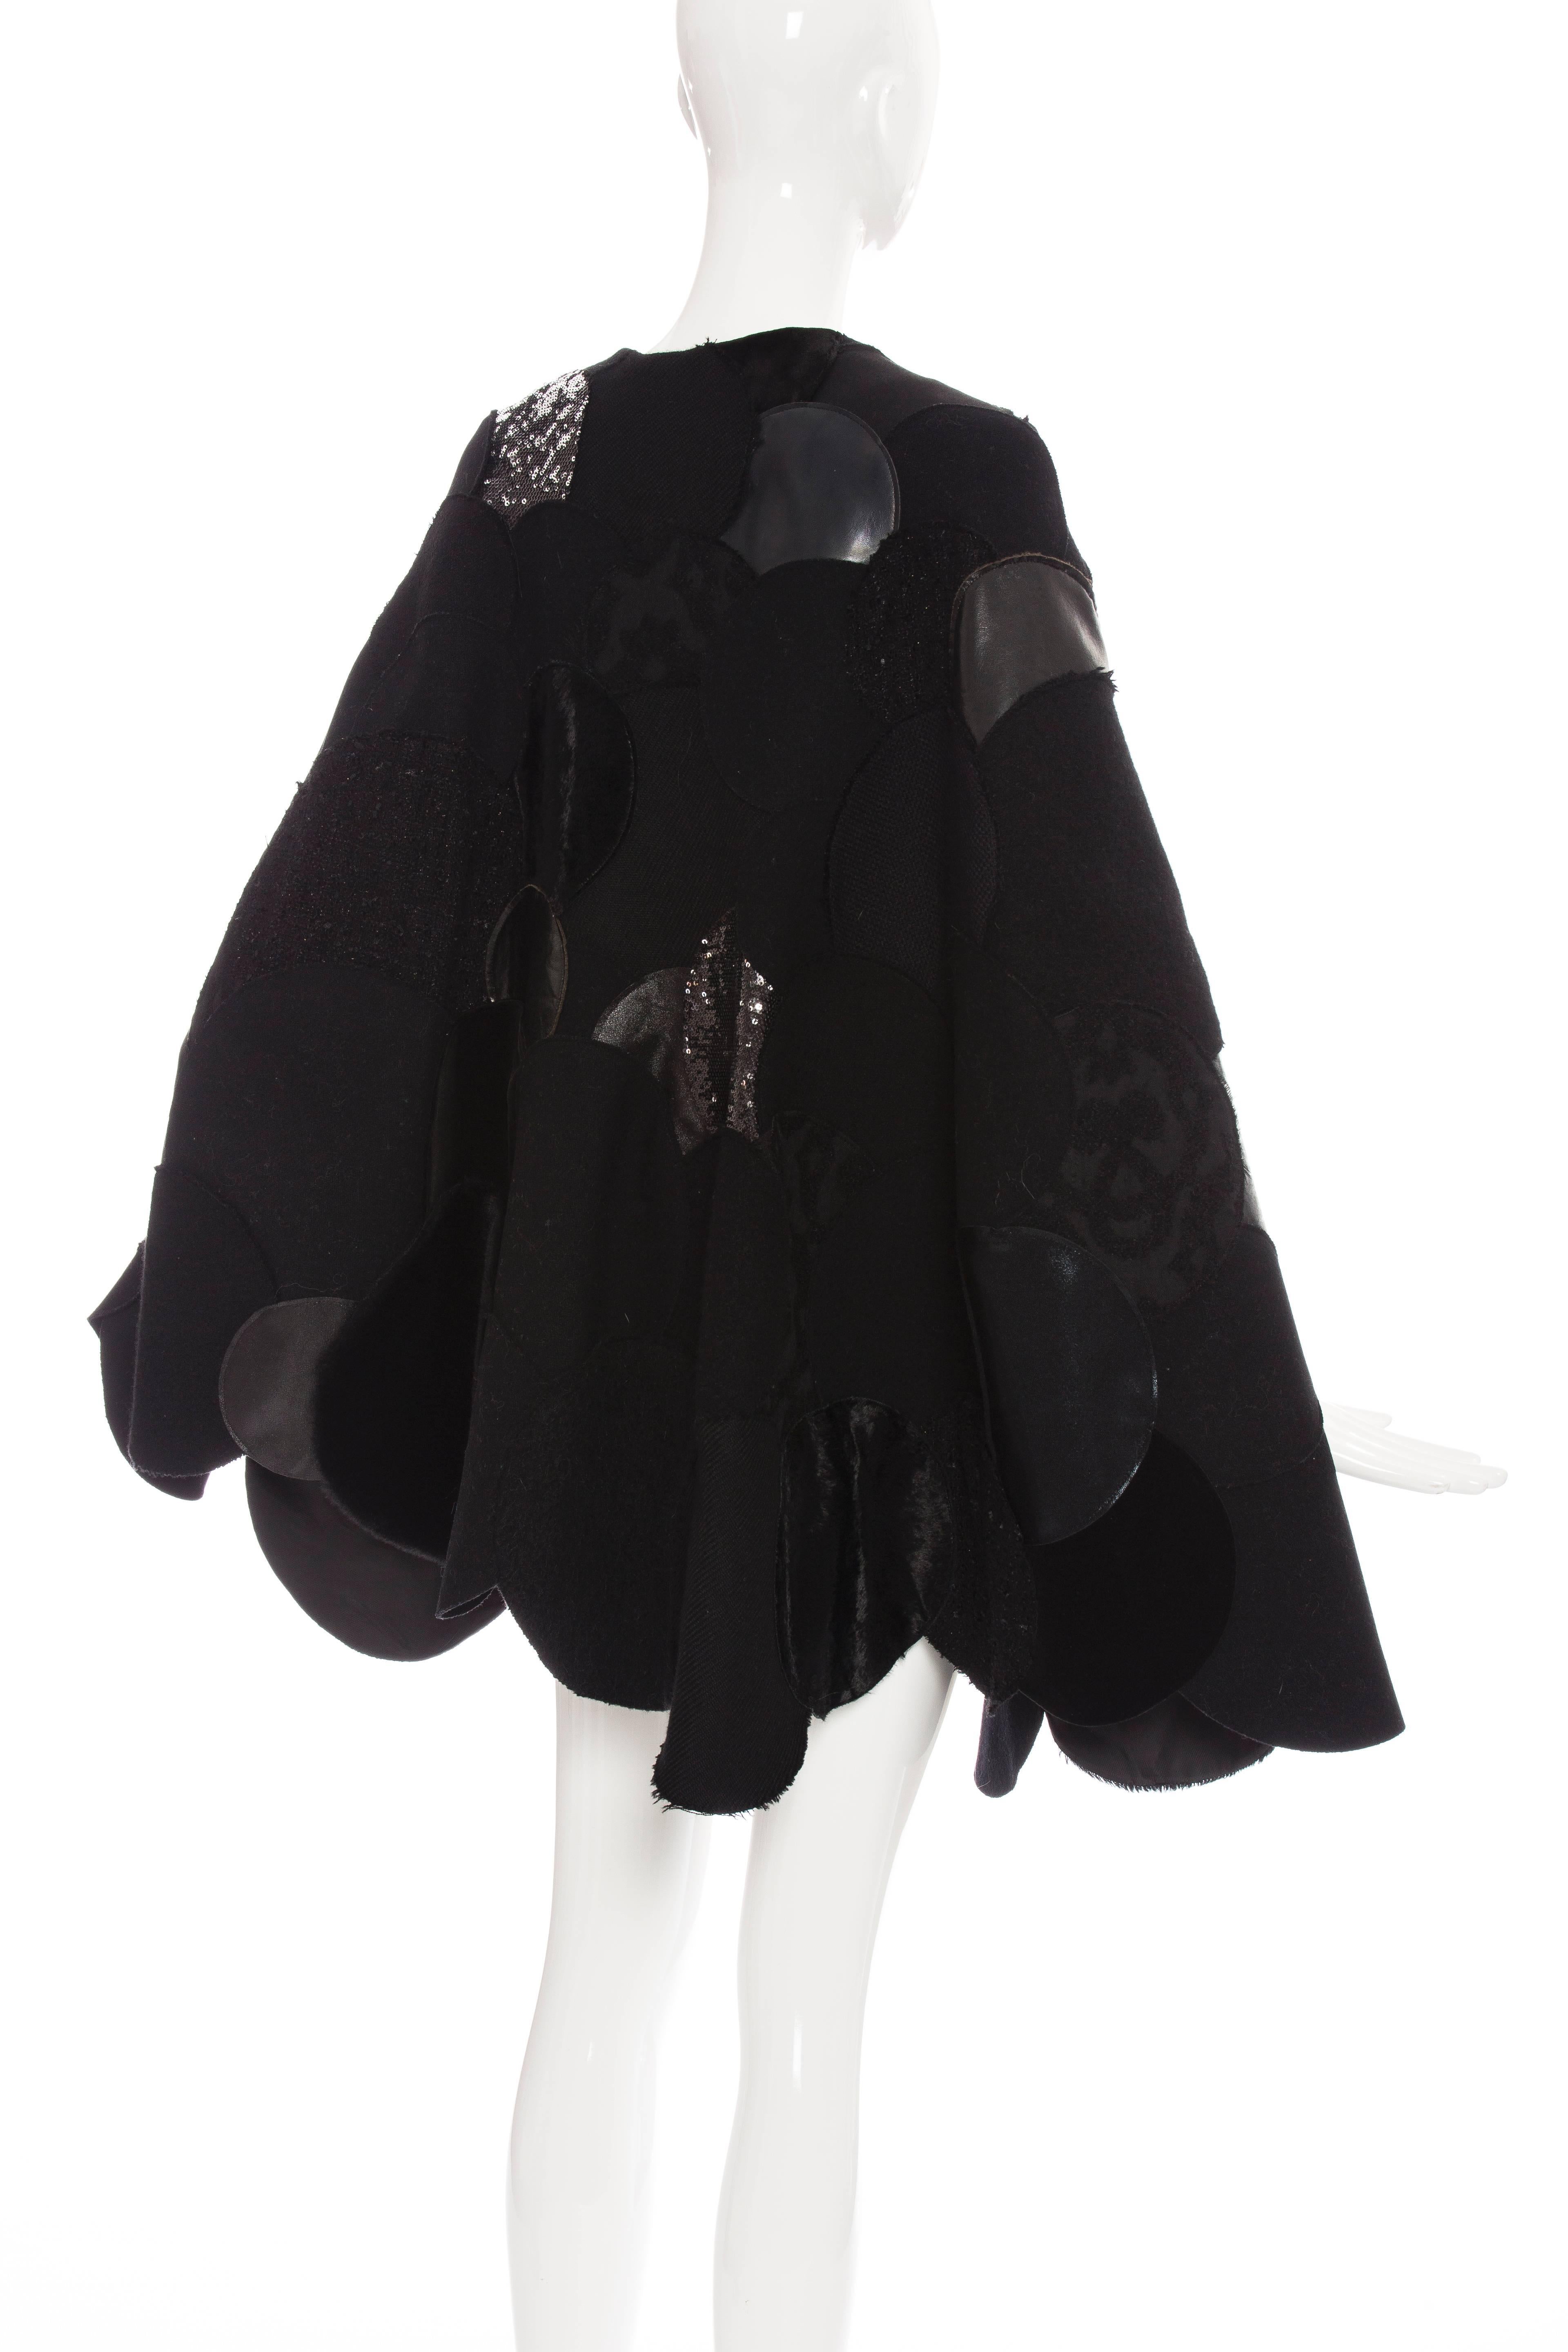 Junya Watanabe Comme des Garcons Black Wool Sequin Leather Cape, Fall 2014 5